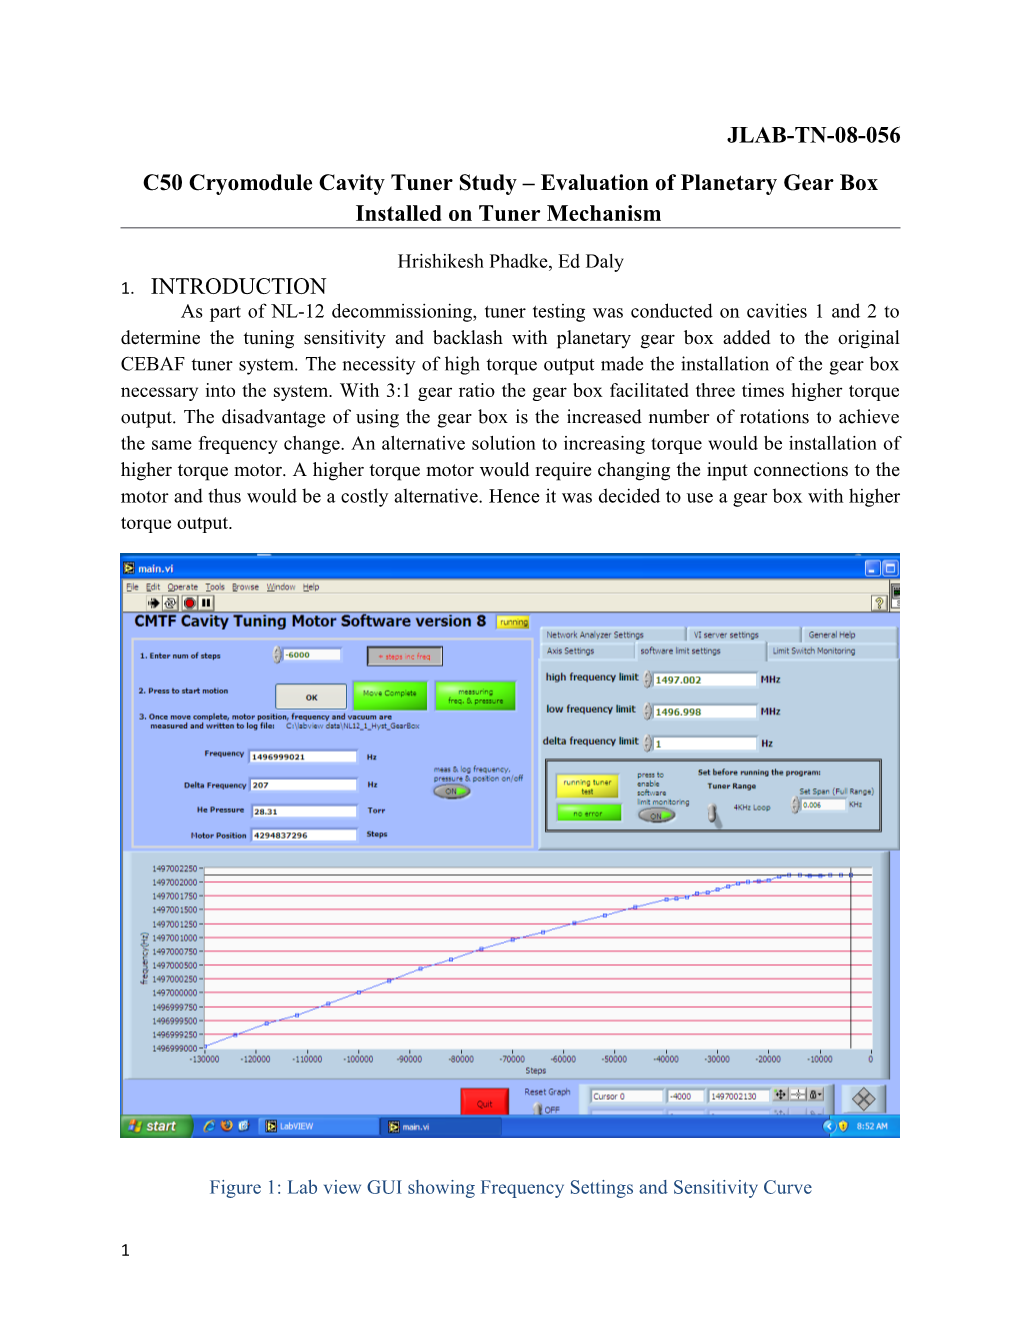 C50 Cryomodule Cavity Tuner Study Evaluation of Planetary Gear Box Installed on Tuner